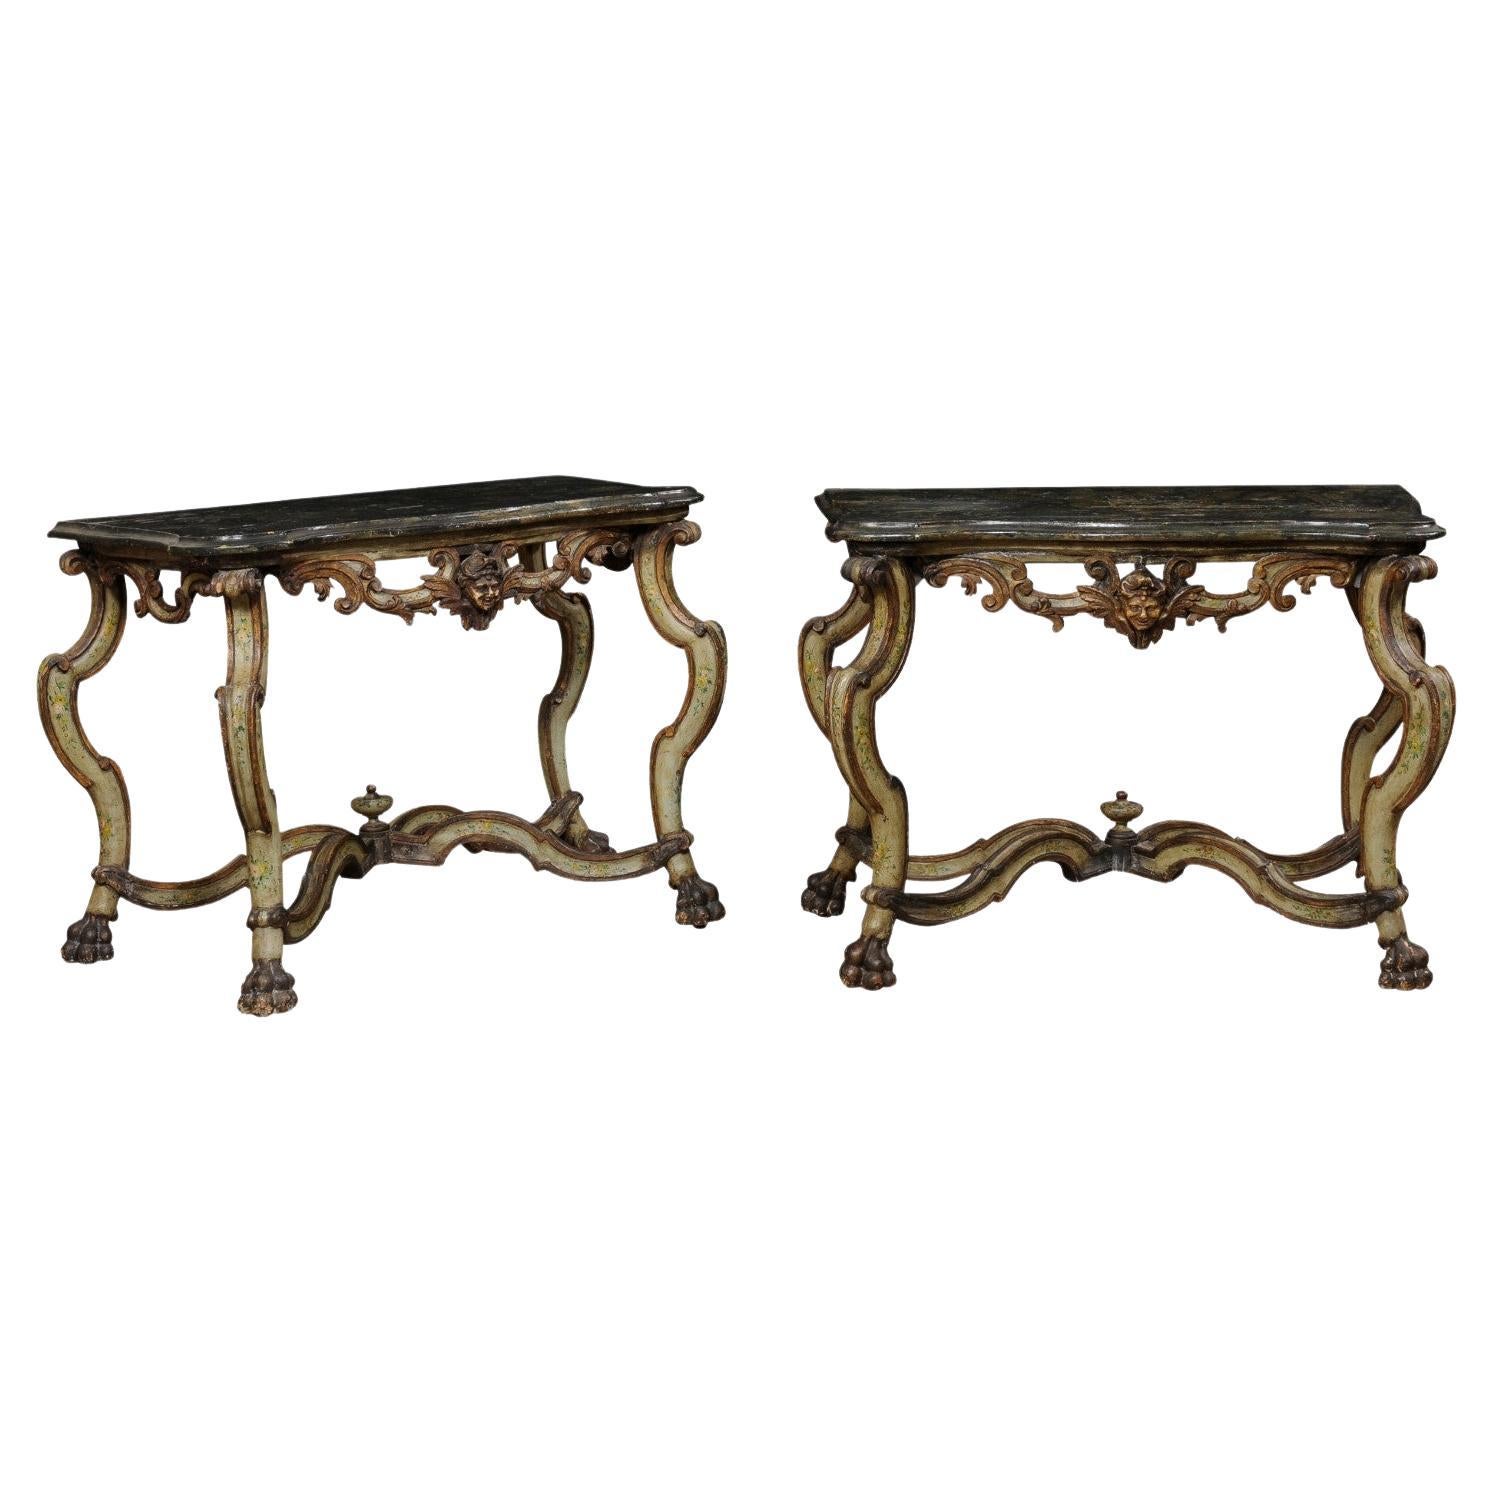 Exquisite Pair of 18th C. Italian Venetian Carved & Painted Wood Console Tables For Sale